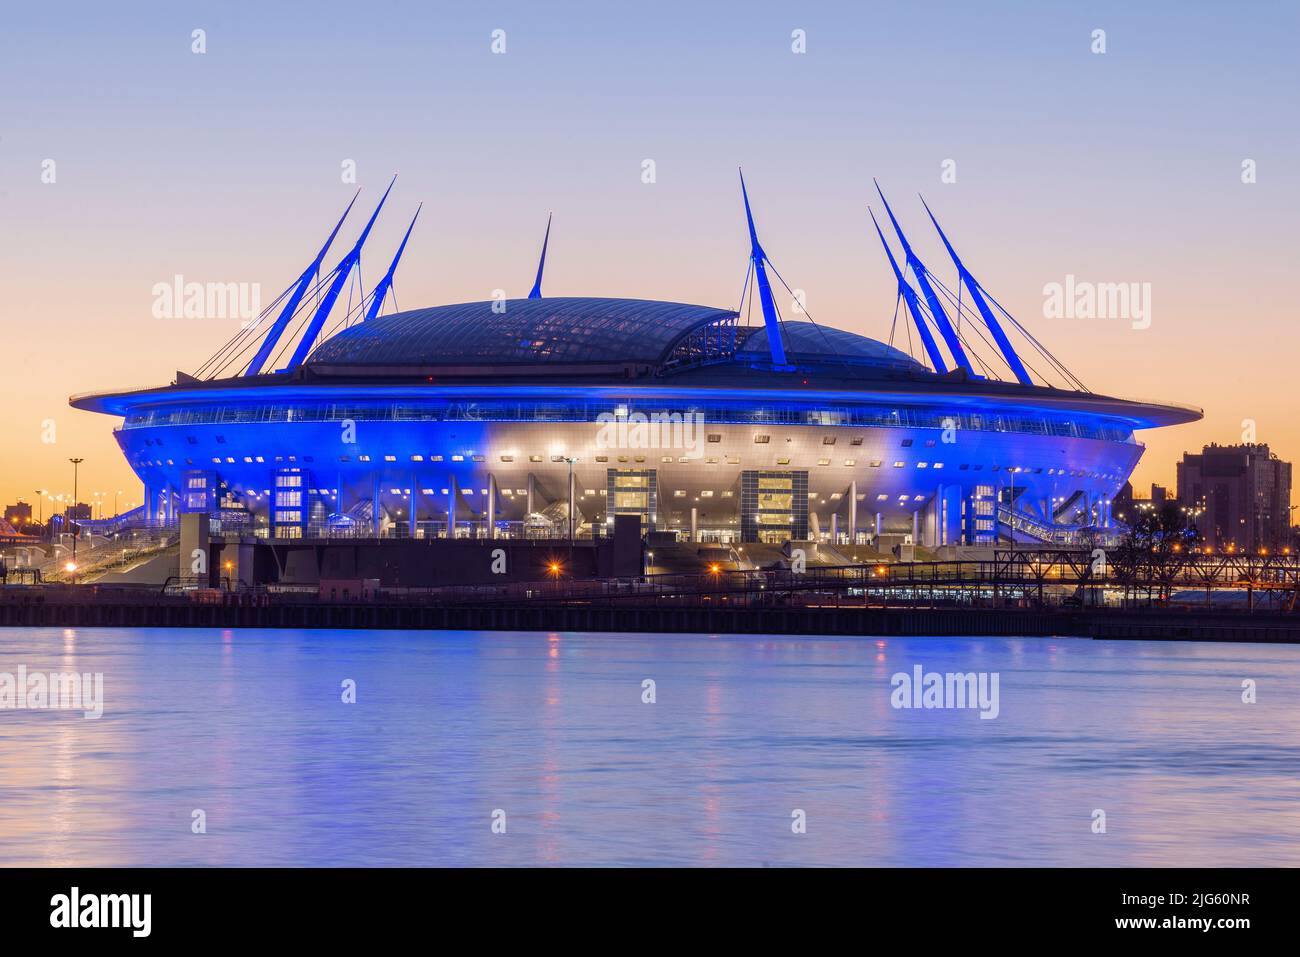 SAINT PETERSBURG, RUSSIA - MAY 29, 2018: View of the modern sports complex 'St. Petersburg Arena' (Zenith Arena) on a May evening Stock Photo